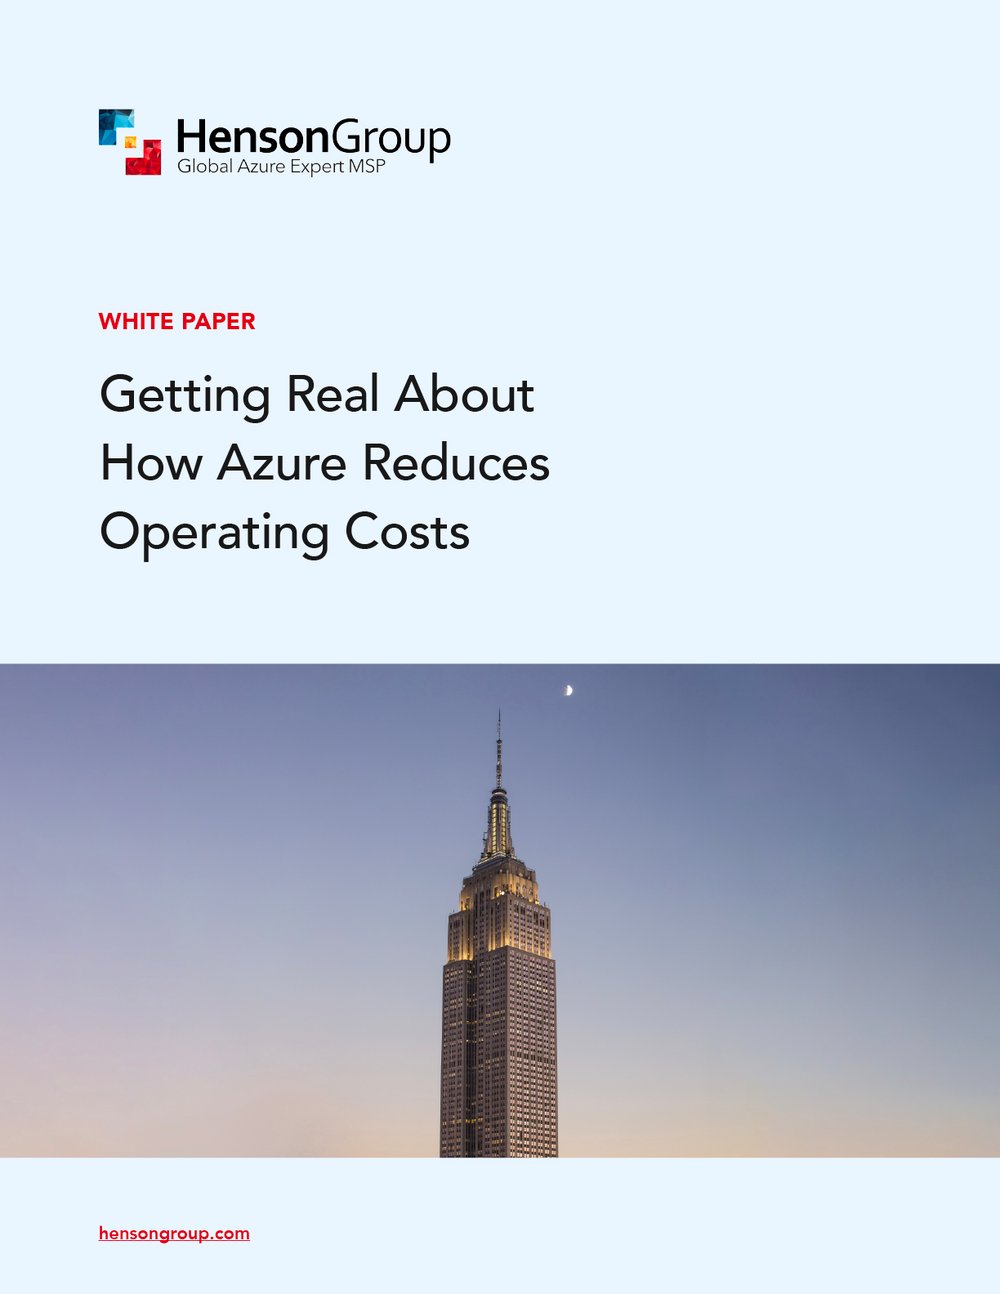 Henson-Group-White-Paper-Getting-Real-About-How-Azure-Reduces-Operating-Costs-IMAGES-Cover